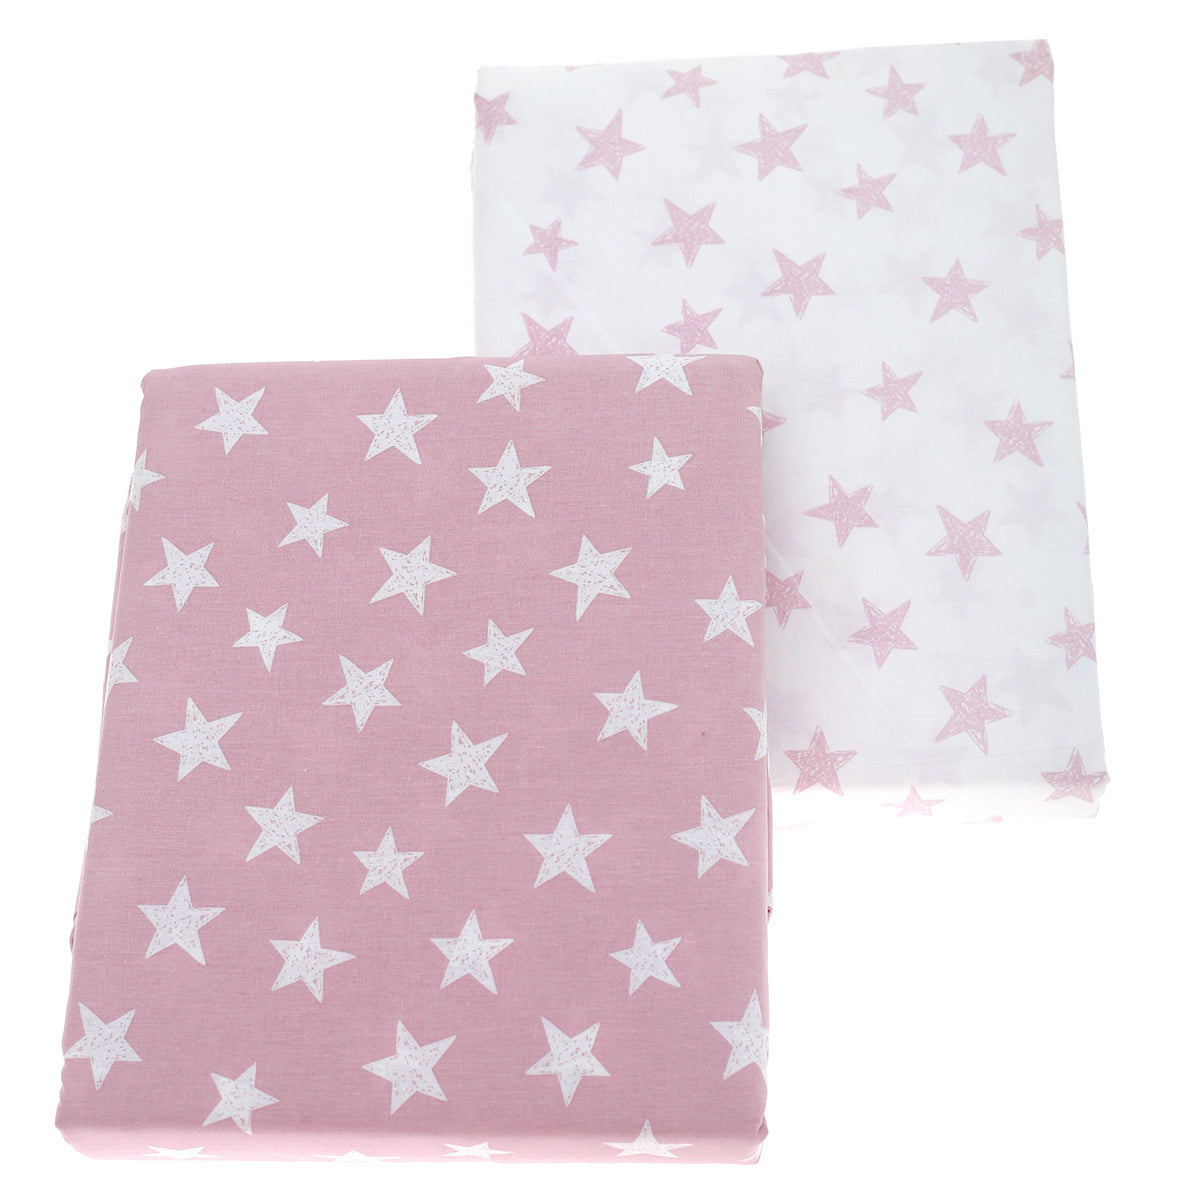 Pink Star Double Bedding Set 6